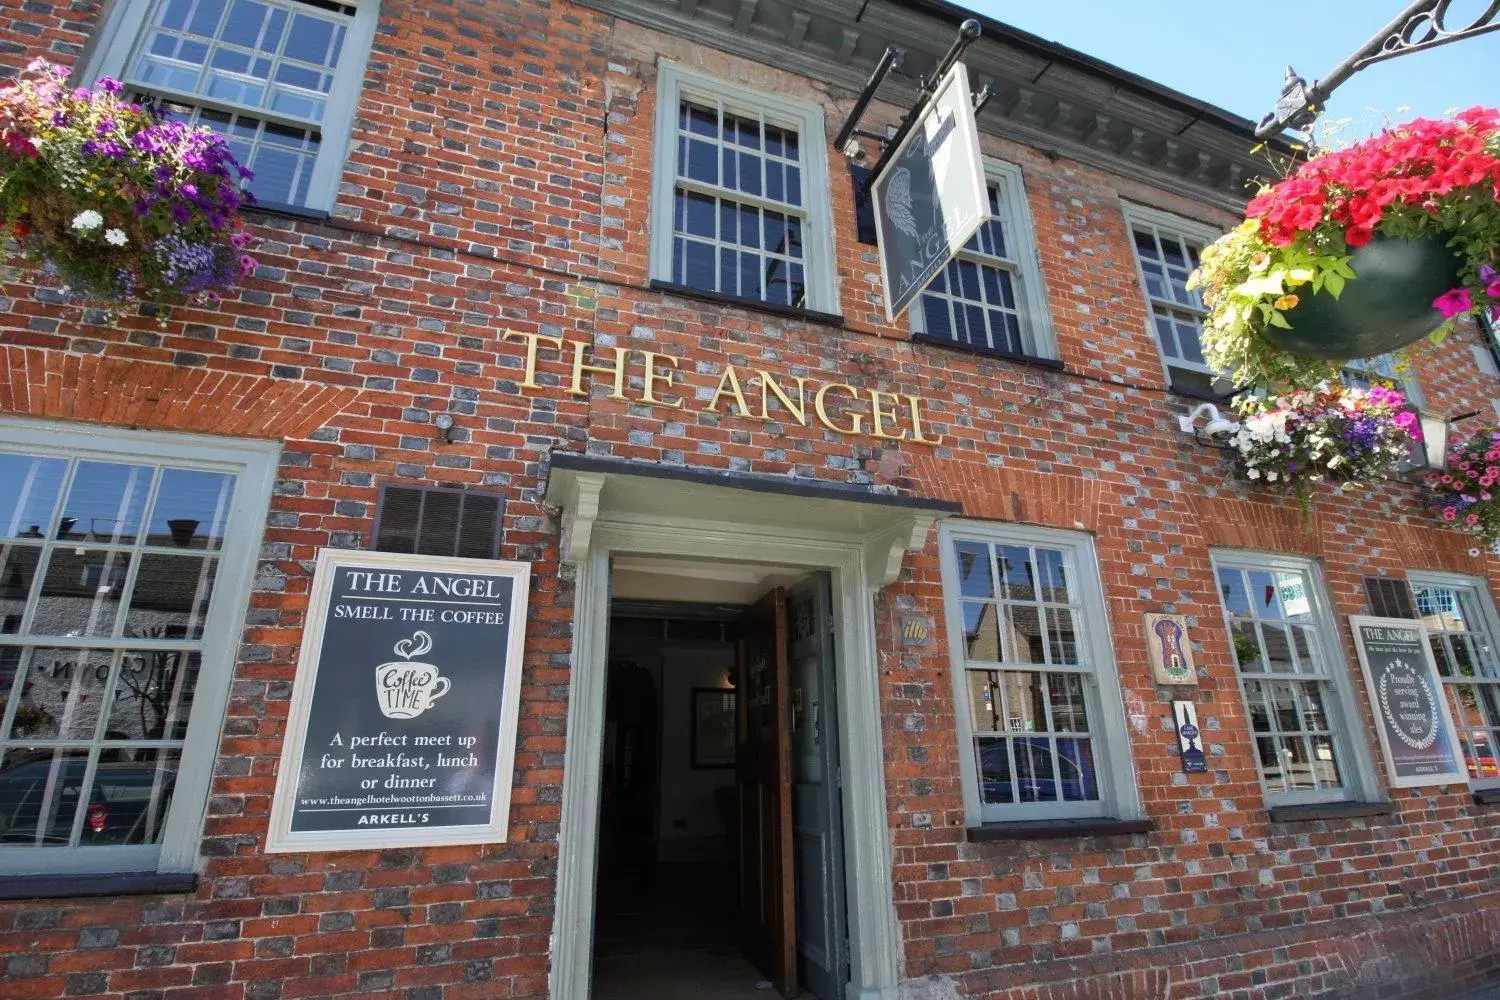 Property building in The Angel in Wootton Bassett